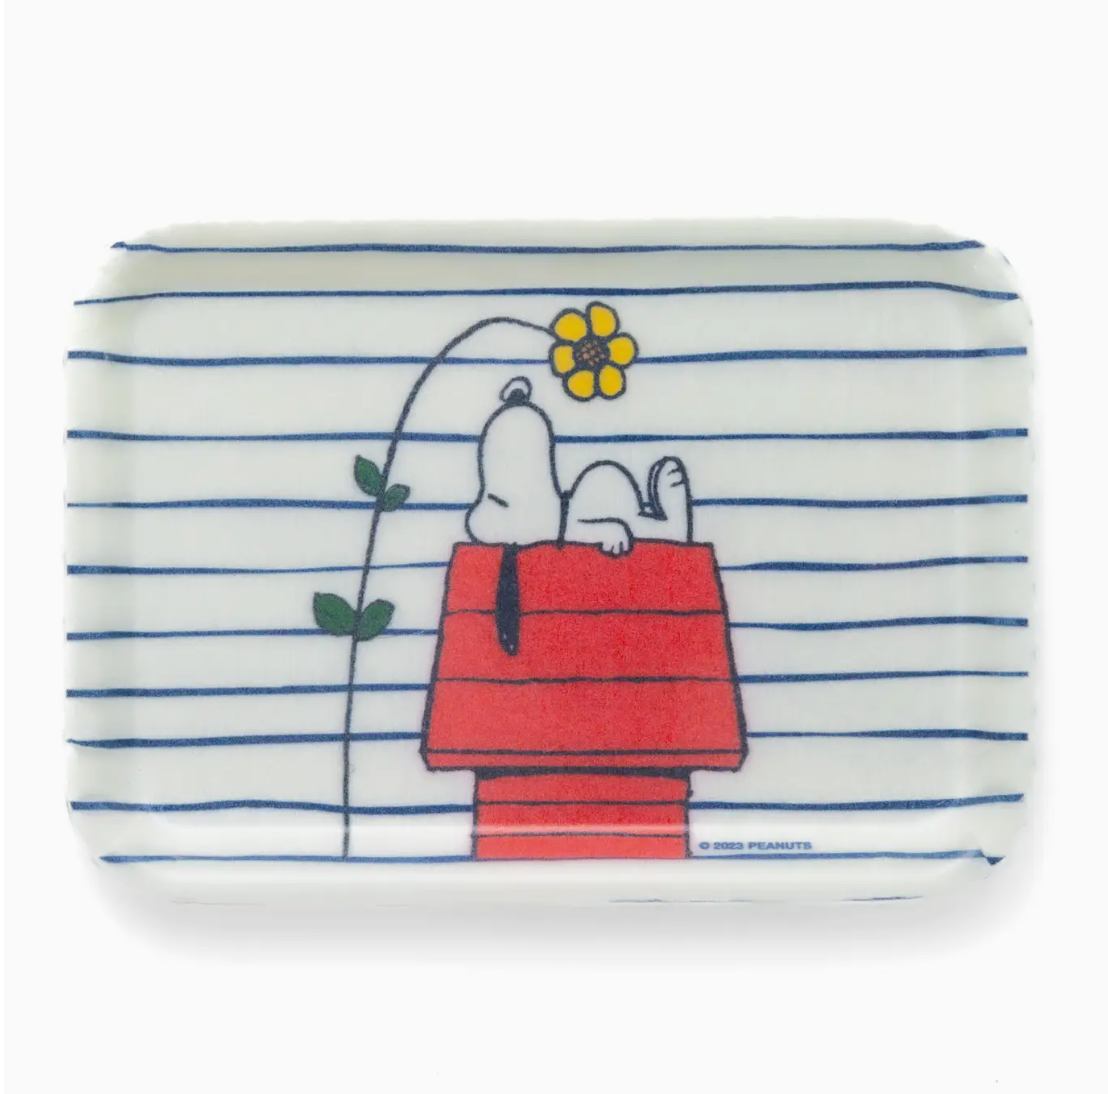 A rectangular soap bar featuring an illustration of Snoopy sitting on a red bungalow with a yellow flower in his mouth, set against a background with blue horizontal stripes - Faire's Peanuts Tray.